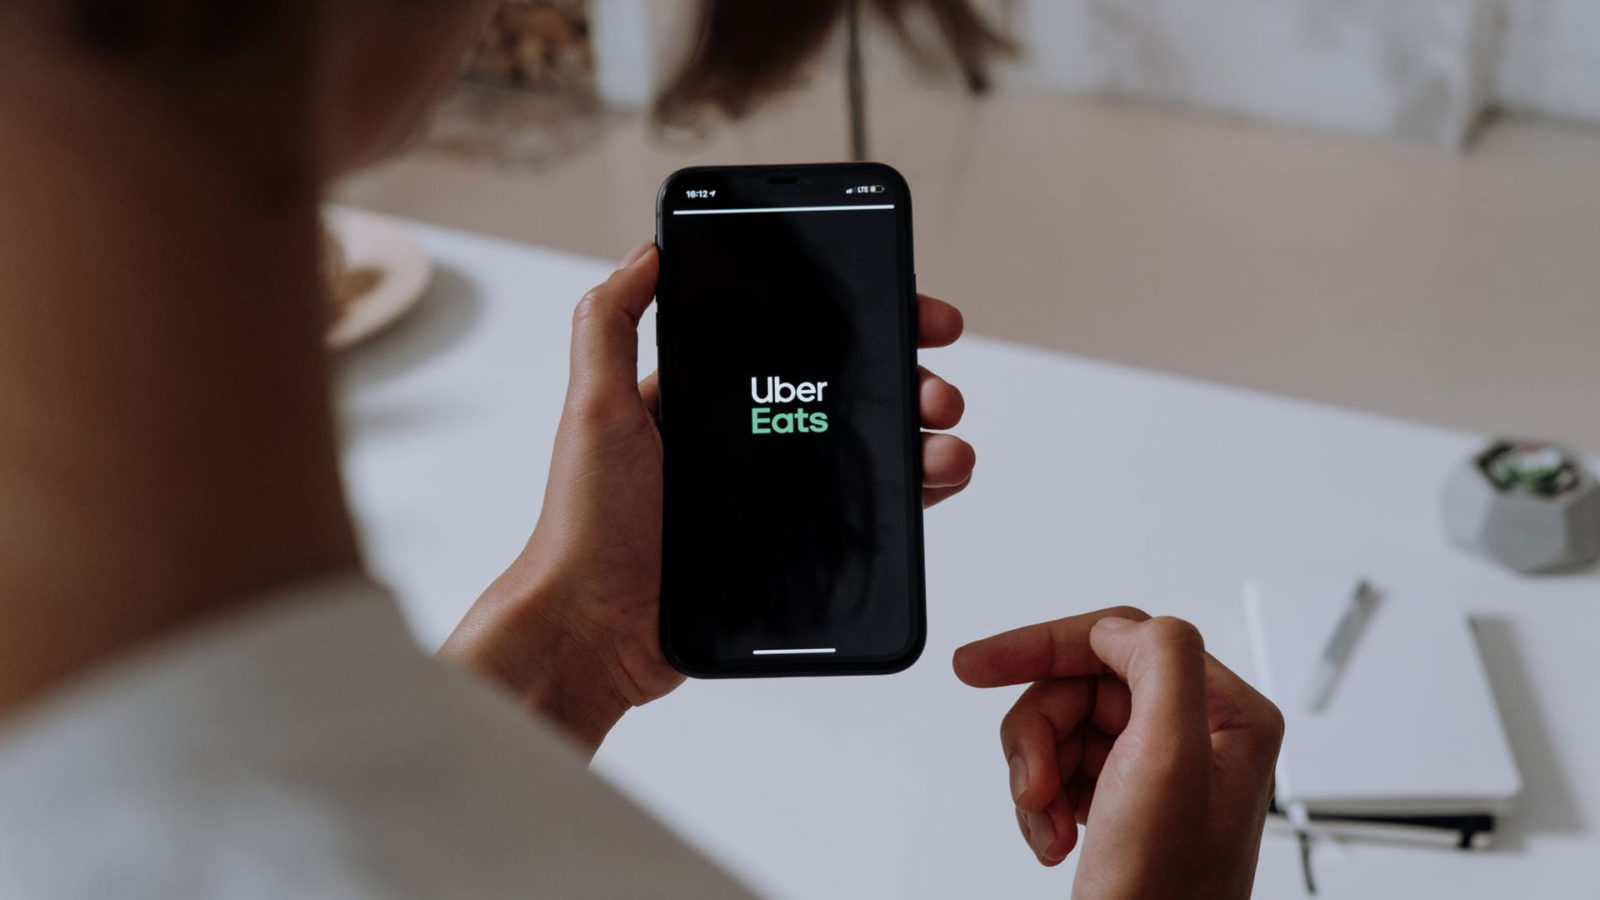 Uber Eats comes up with wet dream for the Dutch